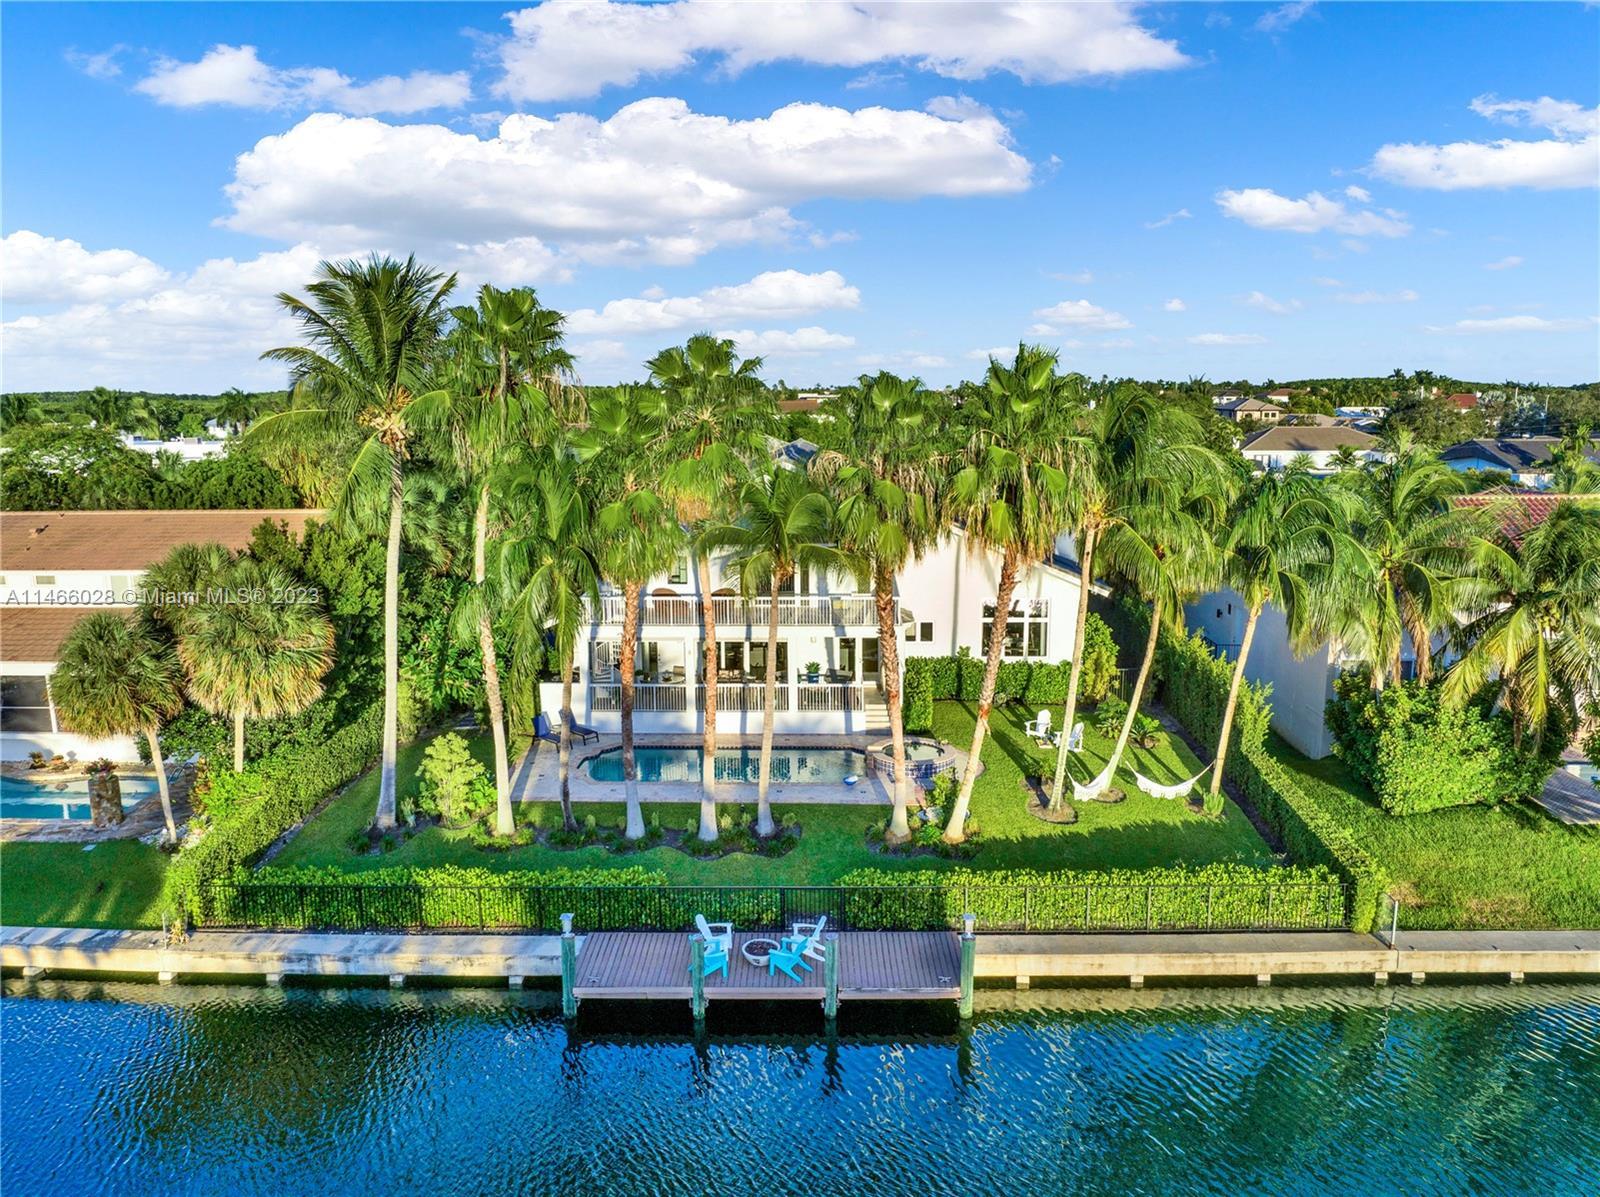 Introducing your waterfront residence, offering resort-style living in Gables by the Sea, an exclusi